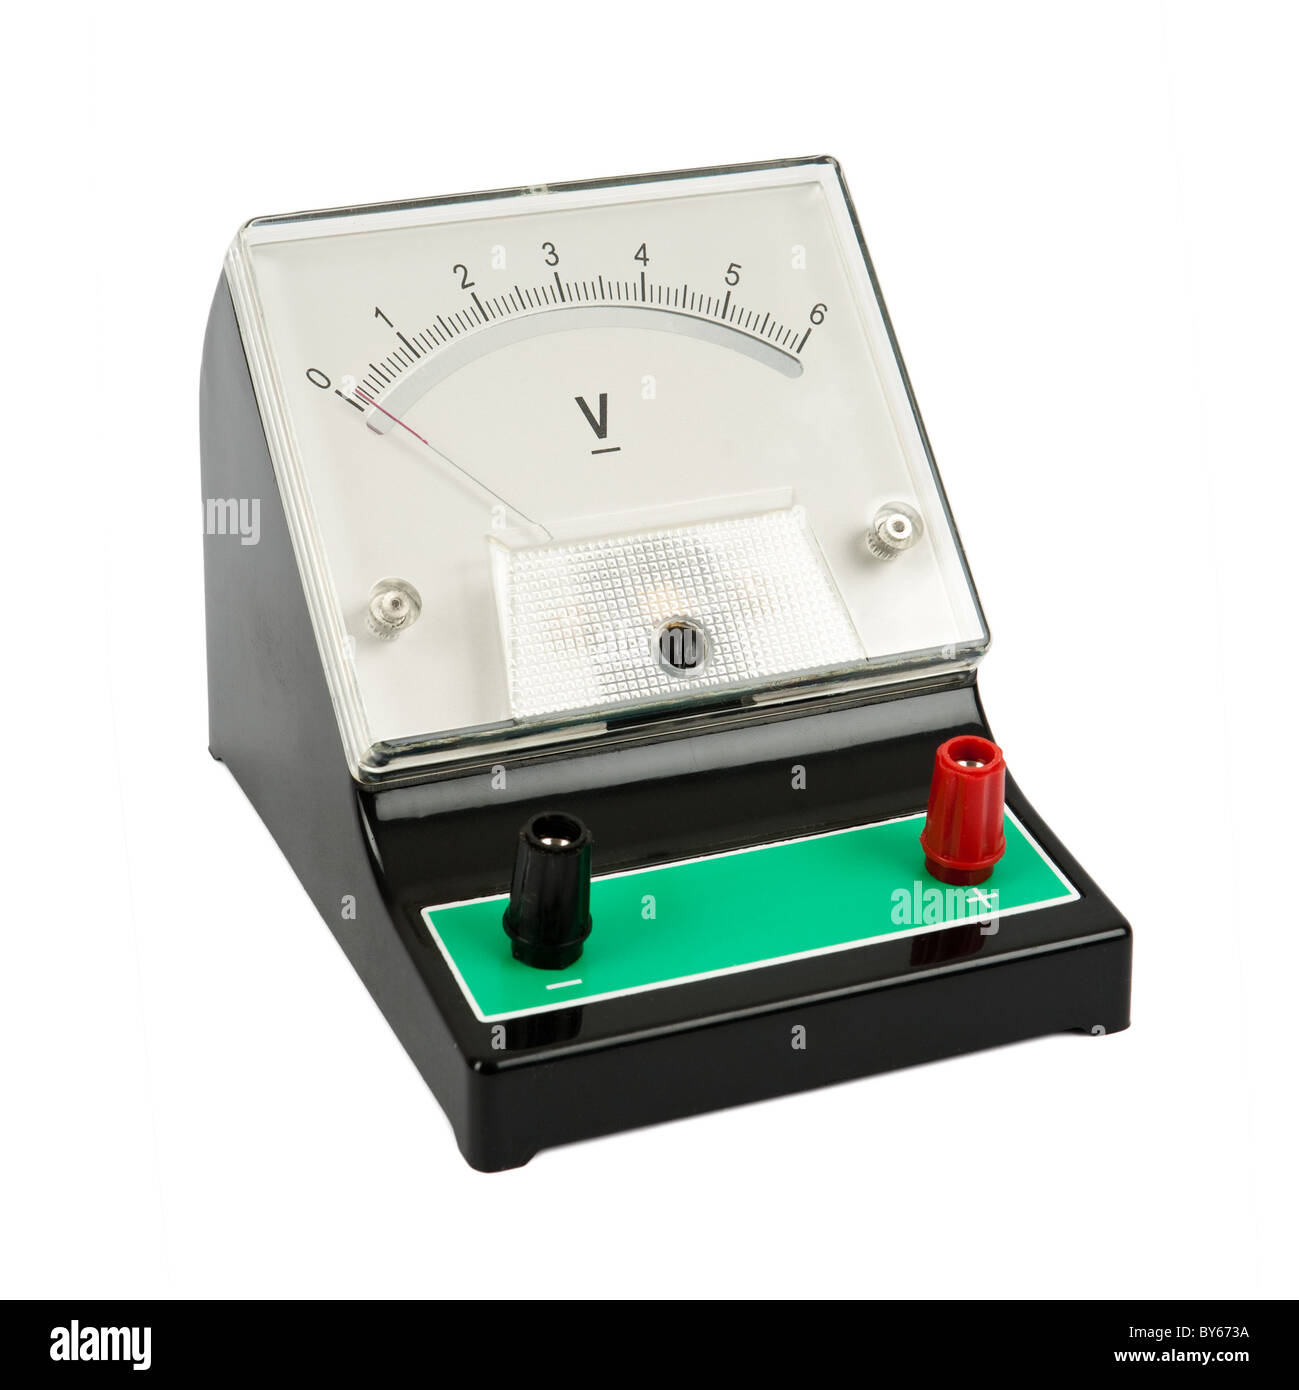 Lesson Video: Design of the Voltmeter